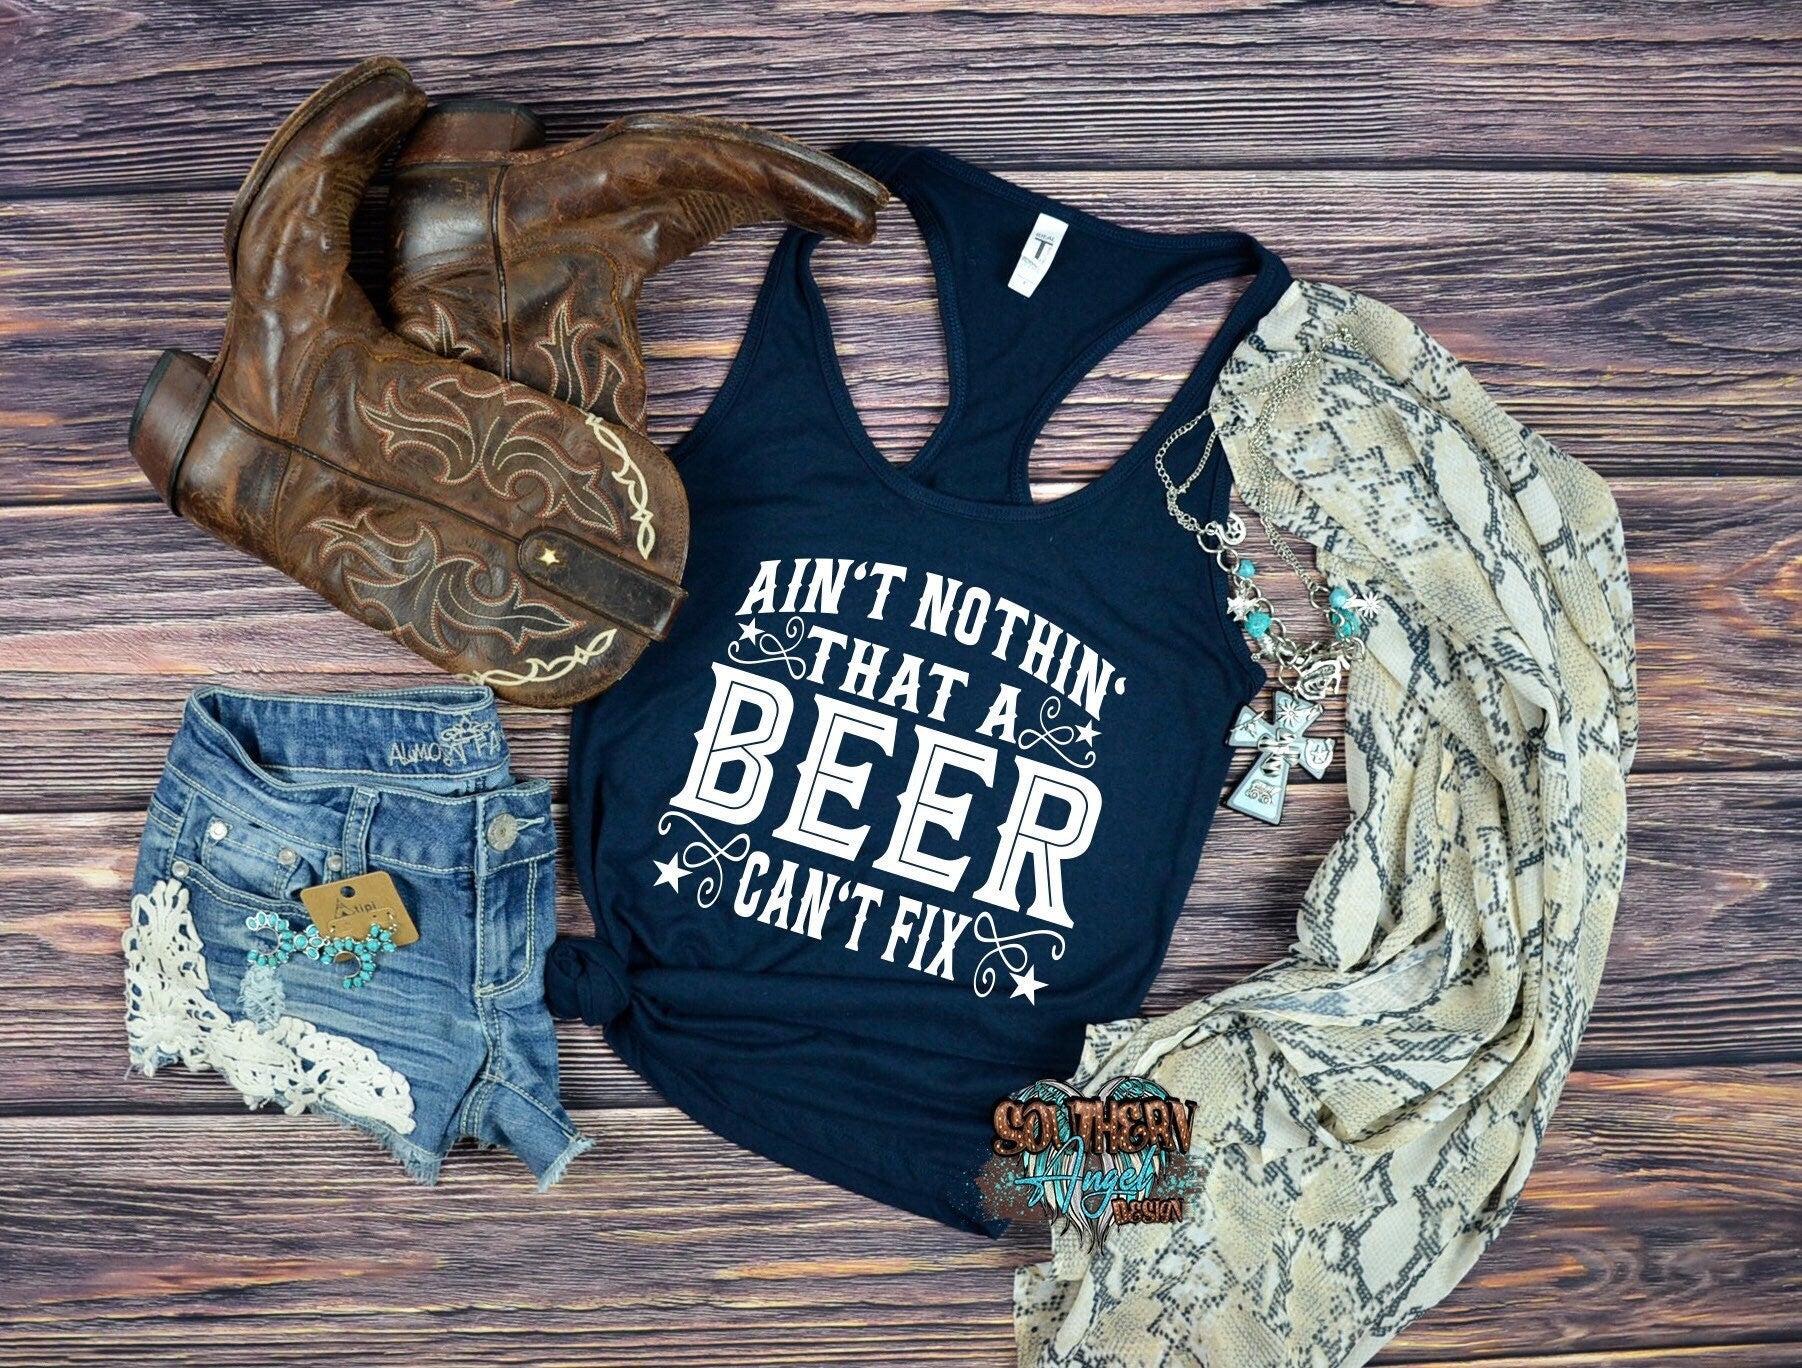 Ain’t nothin’ that a beer can’t fix tank | Country music shirt | Country Thunder | Country concert shirt | Country music festival | Rodeo